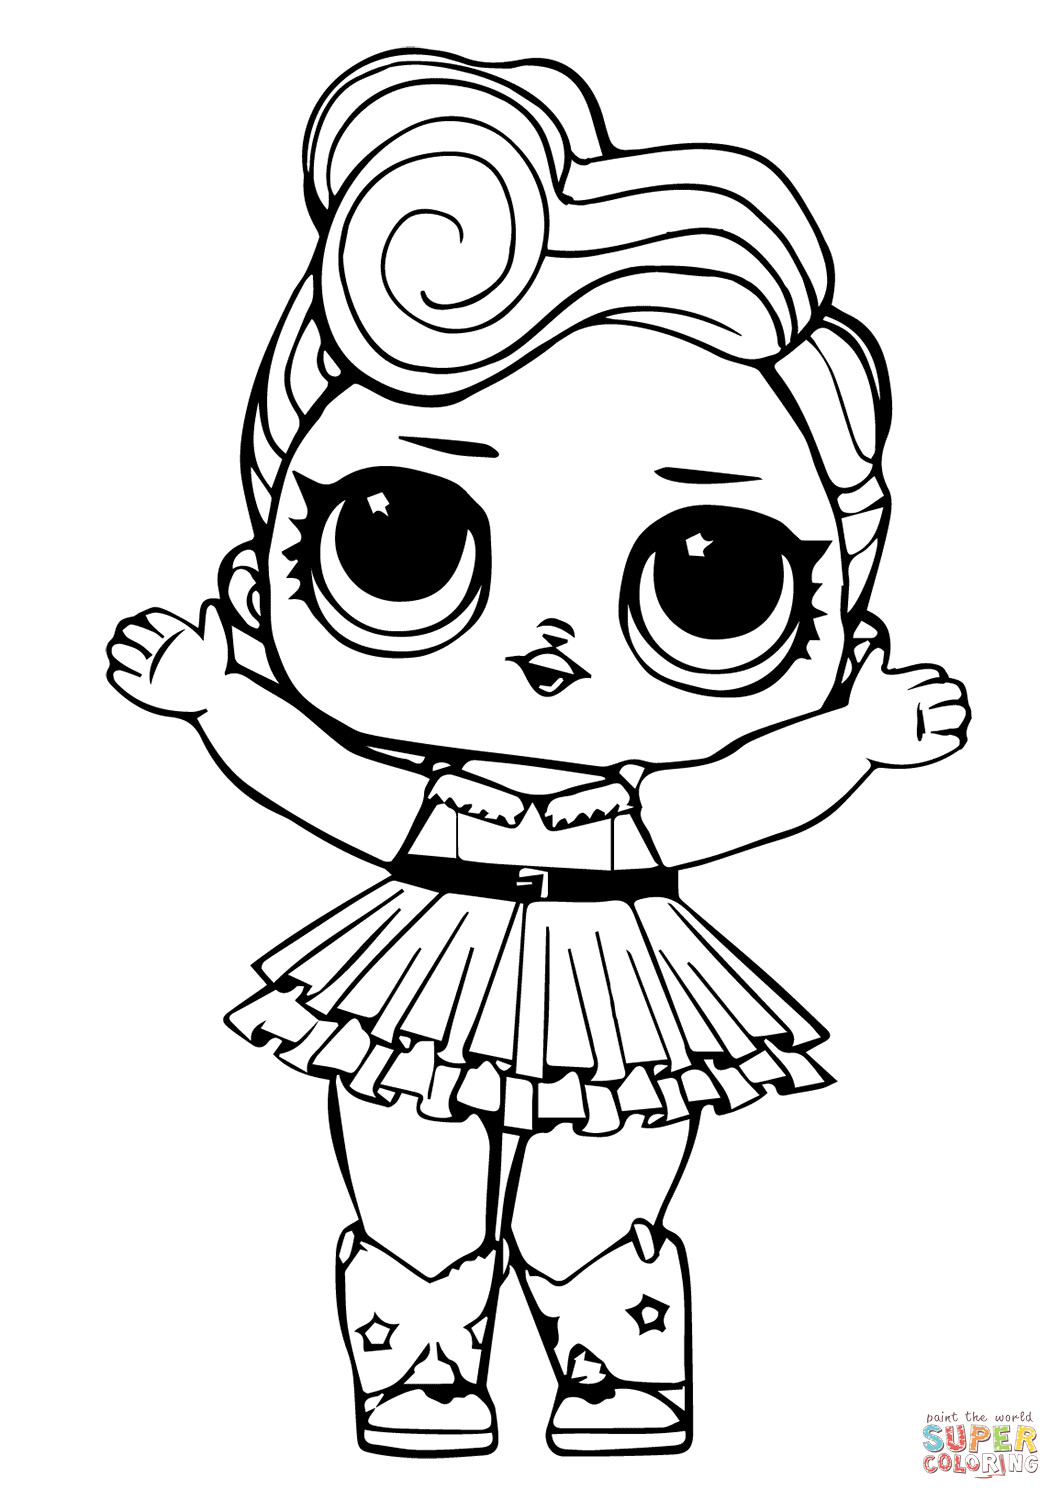 Lol Printable Coloring Pages
 Printable Coloring Pages For Girls Lol